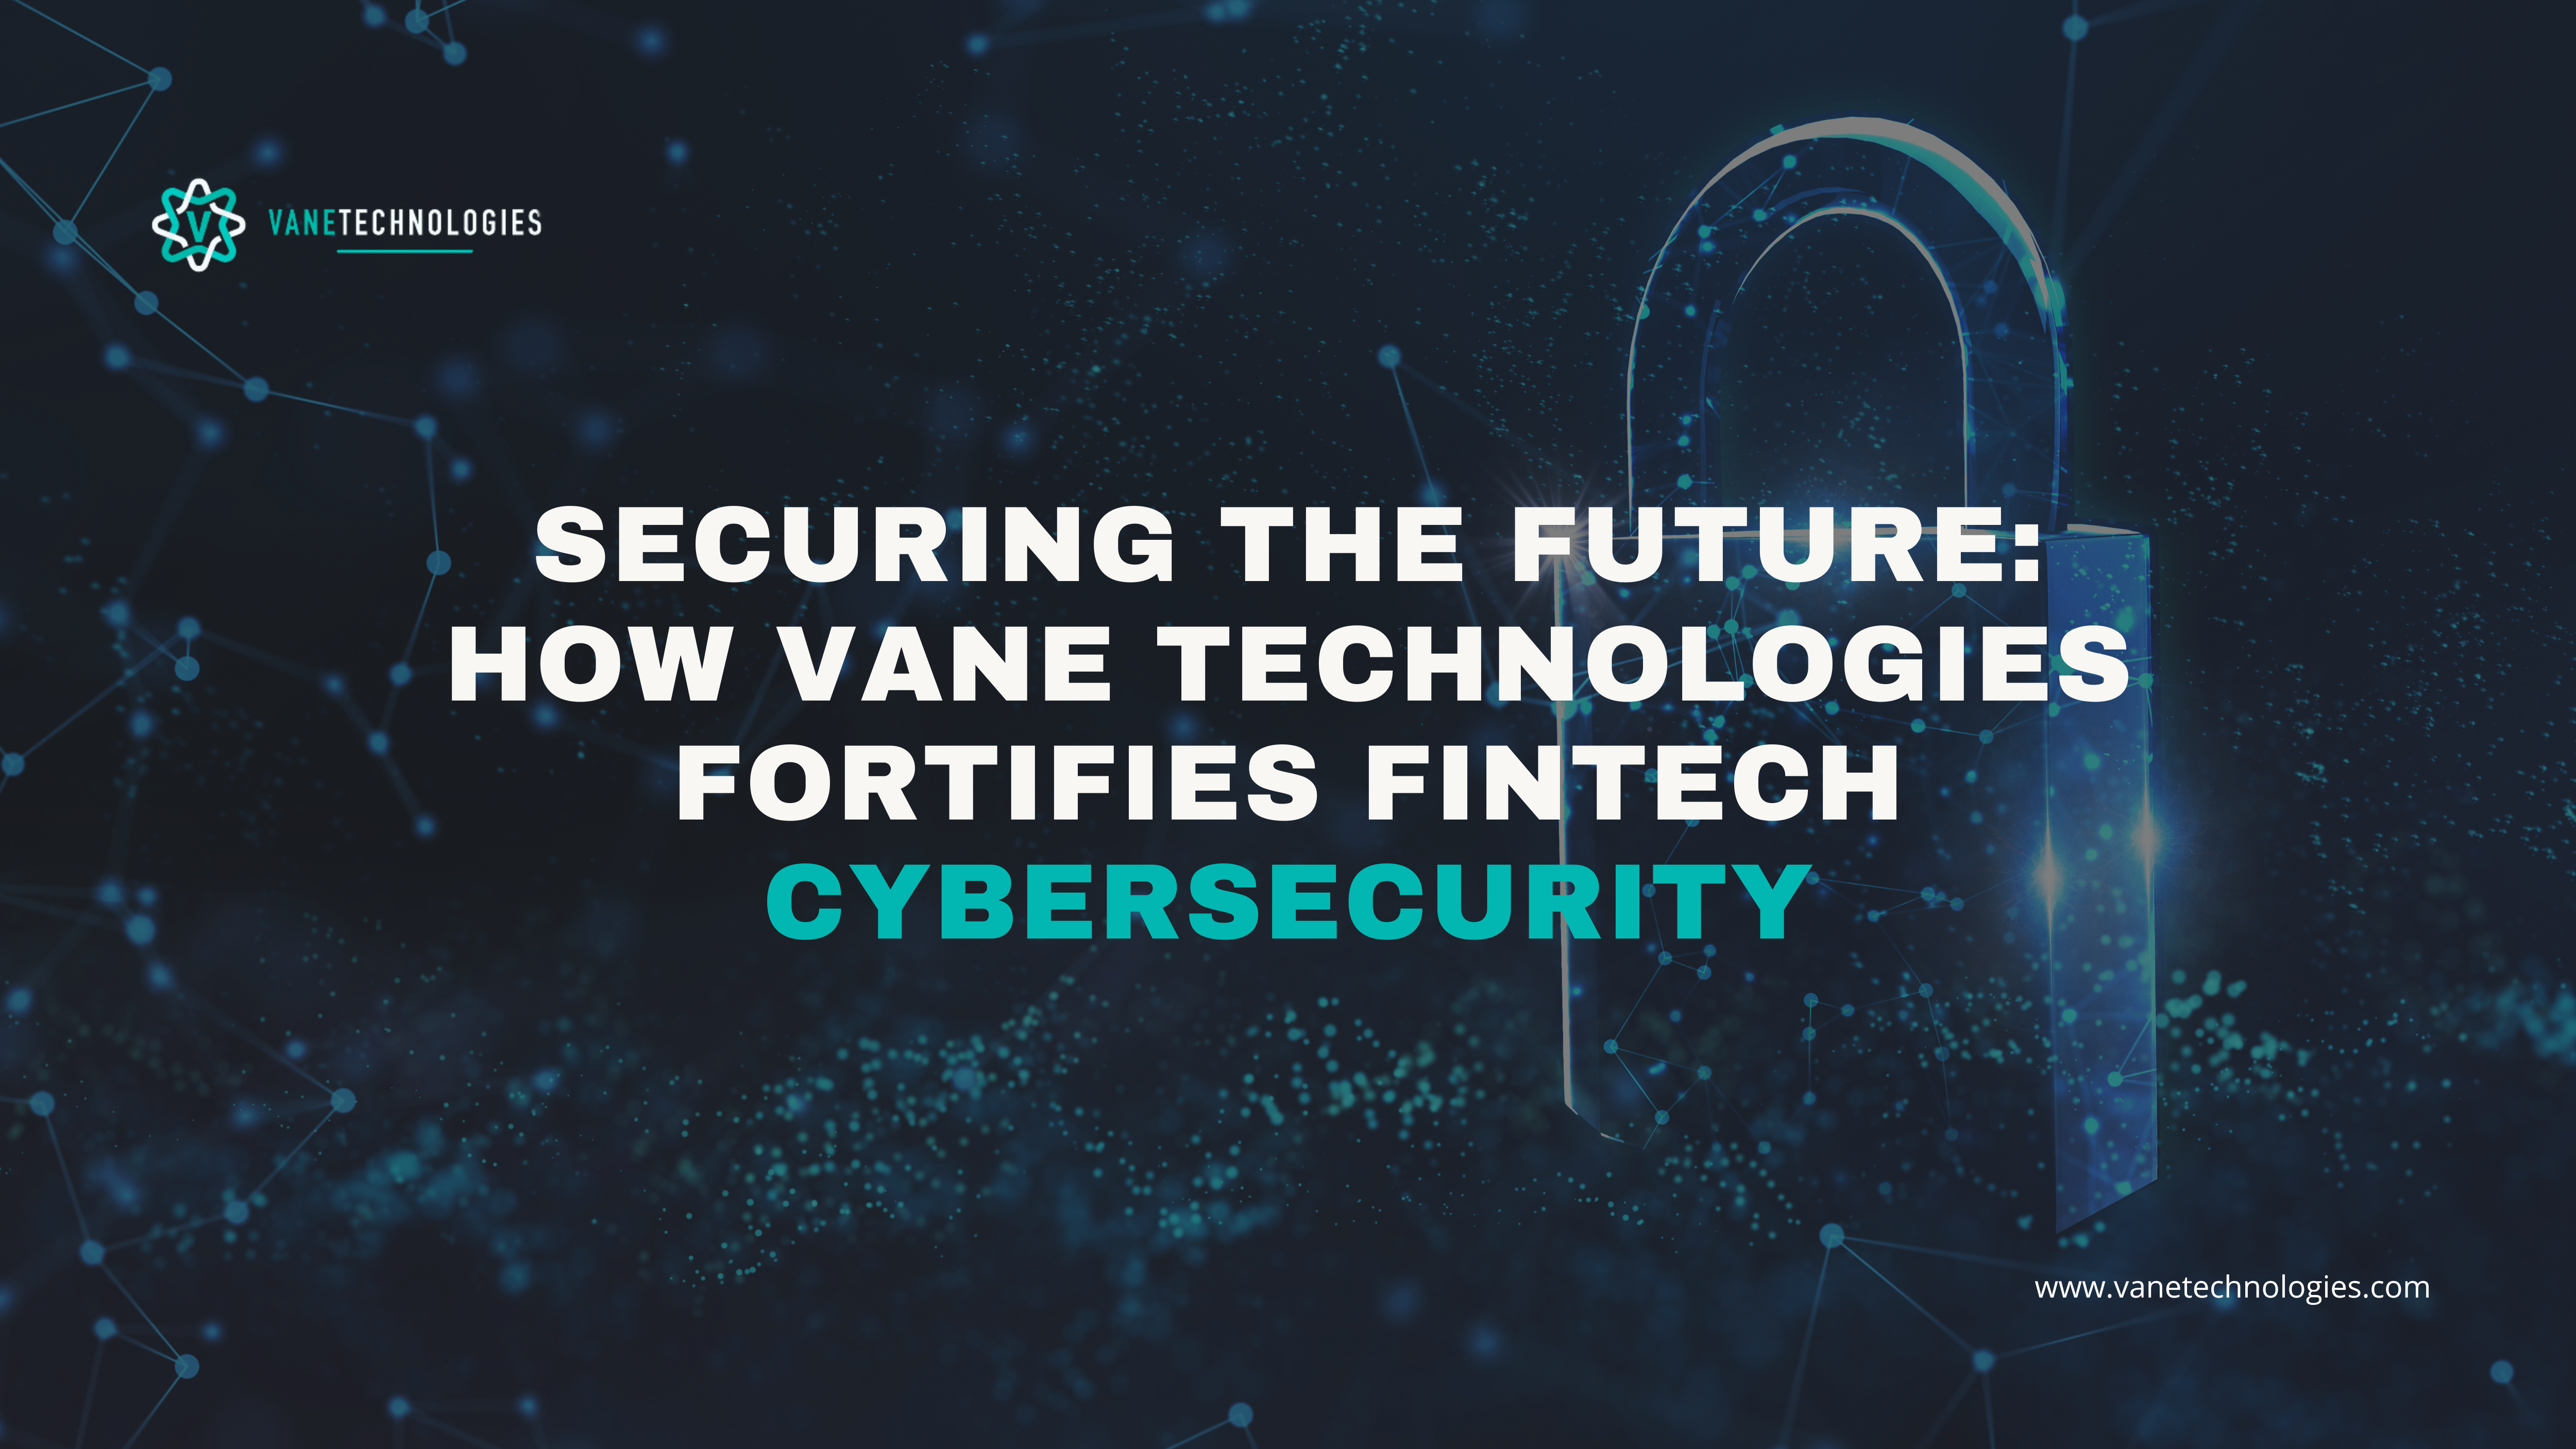 Securing the Future: How Vane Technologies Fortifies Fintech Cybersecurity